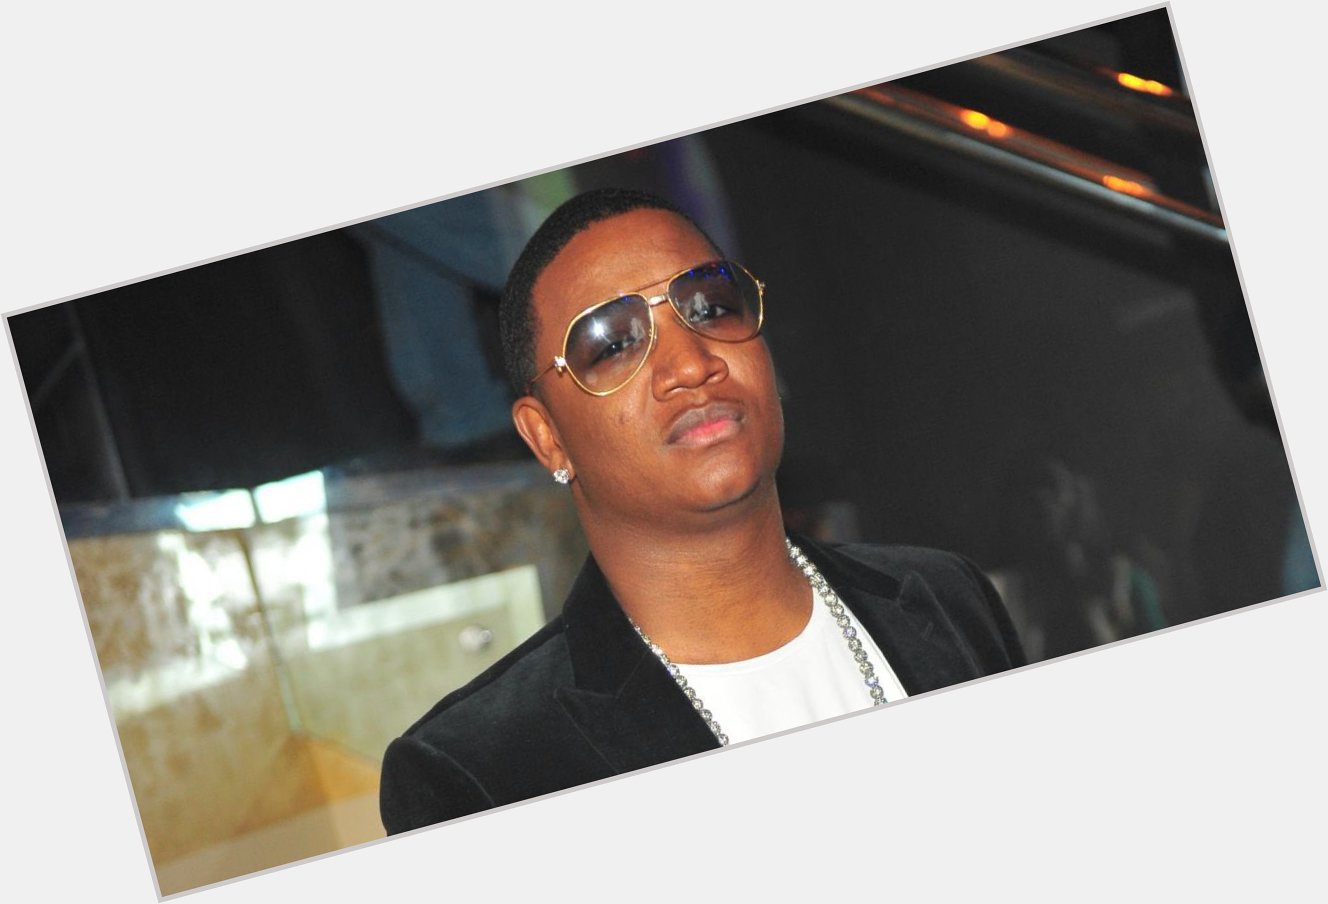 Wishing a Happy 38th Birthday to Yung Joc  . What s your favorite Joc hit?  